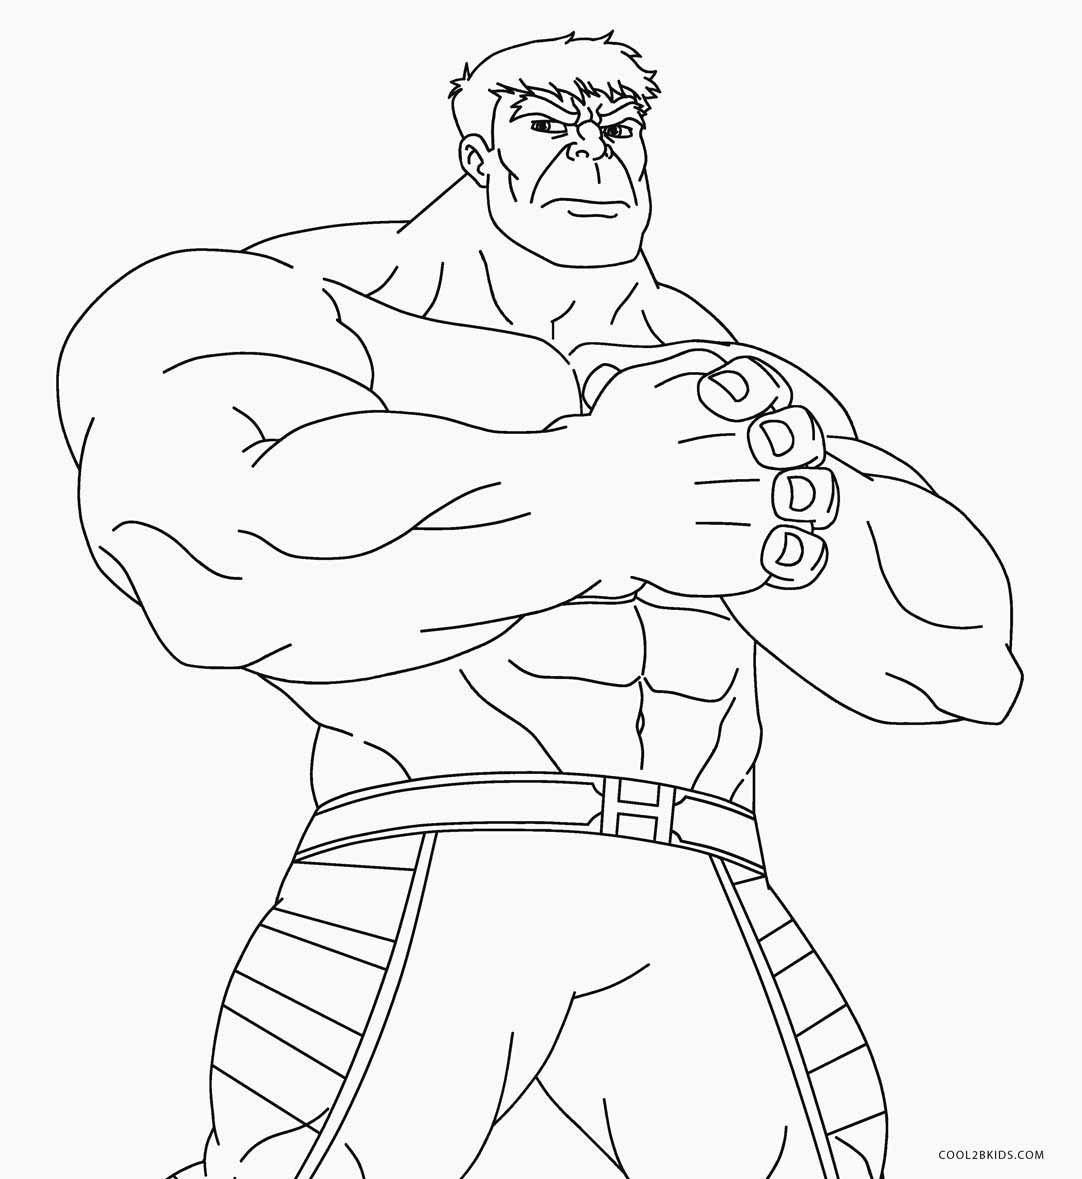 Hulk Coloring Pages For Kids
 Free Printable Hulk Coloring Pages For Kids